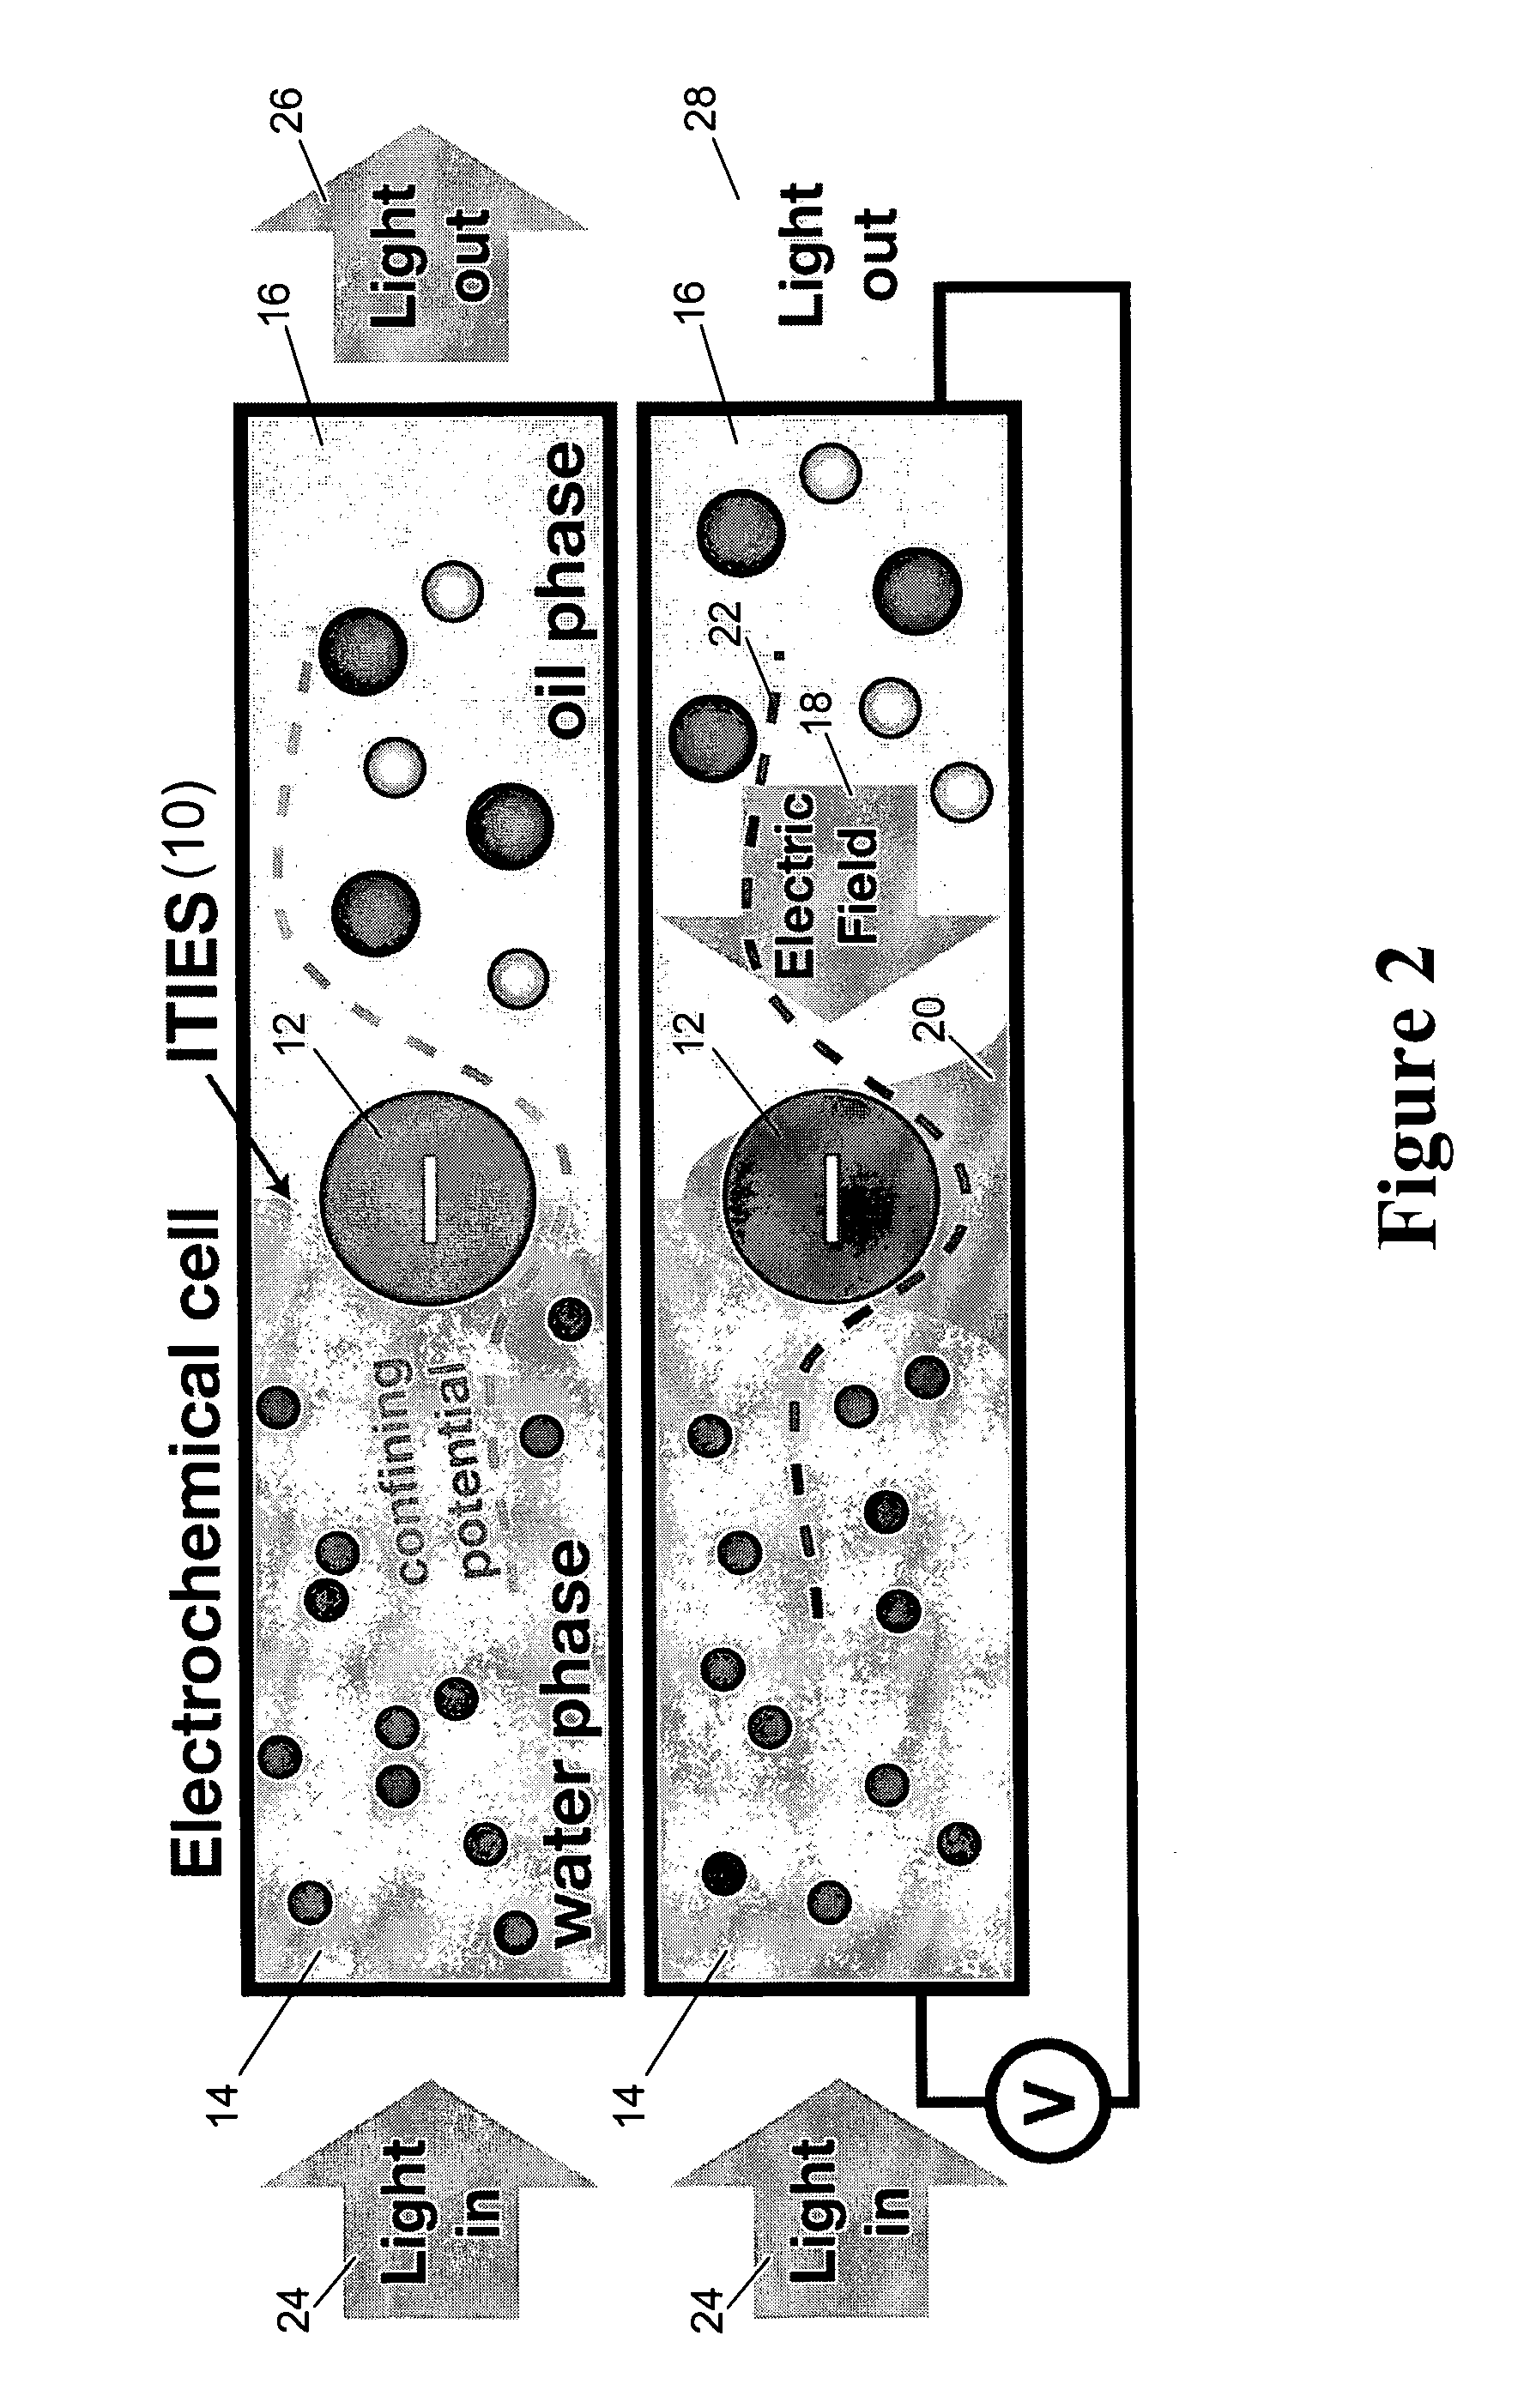 Electrically-tunable optical devices